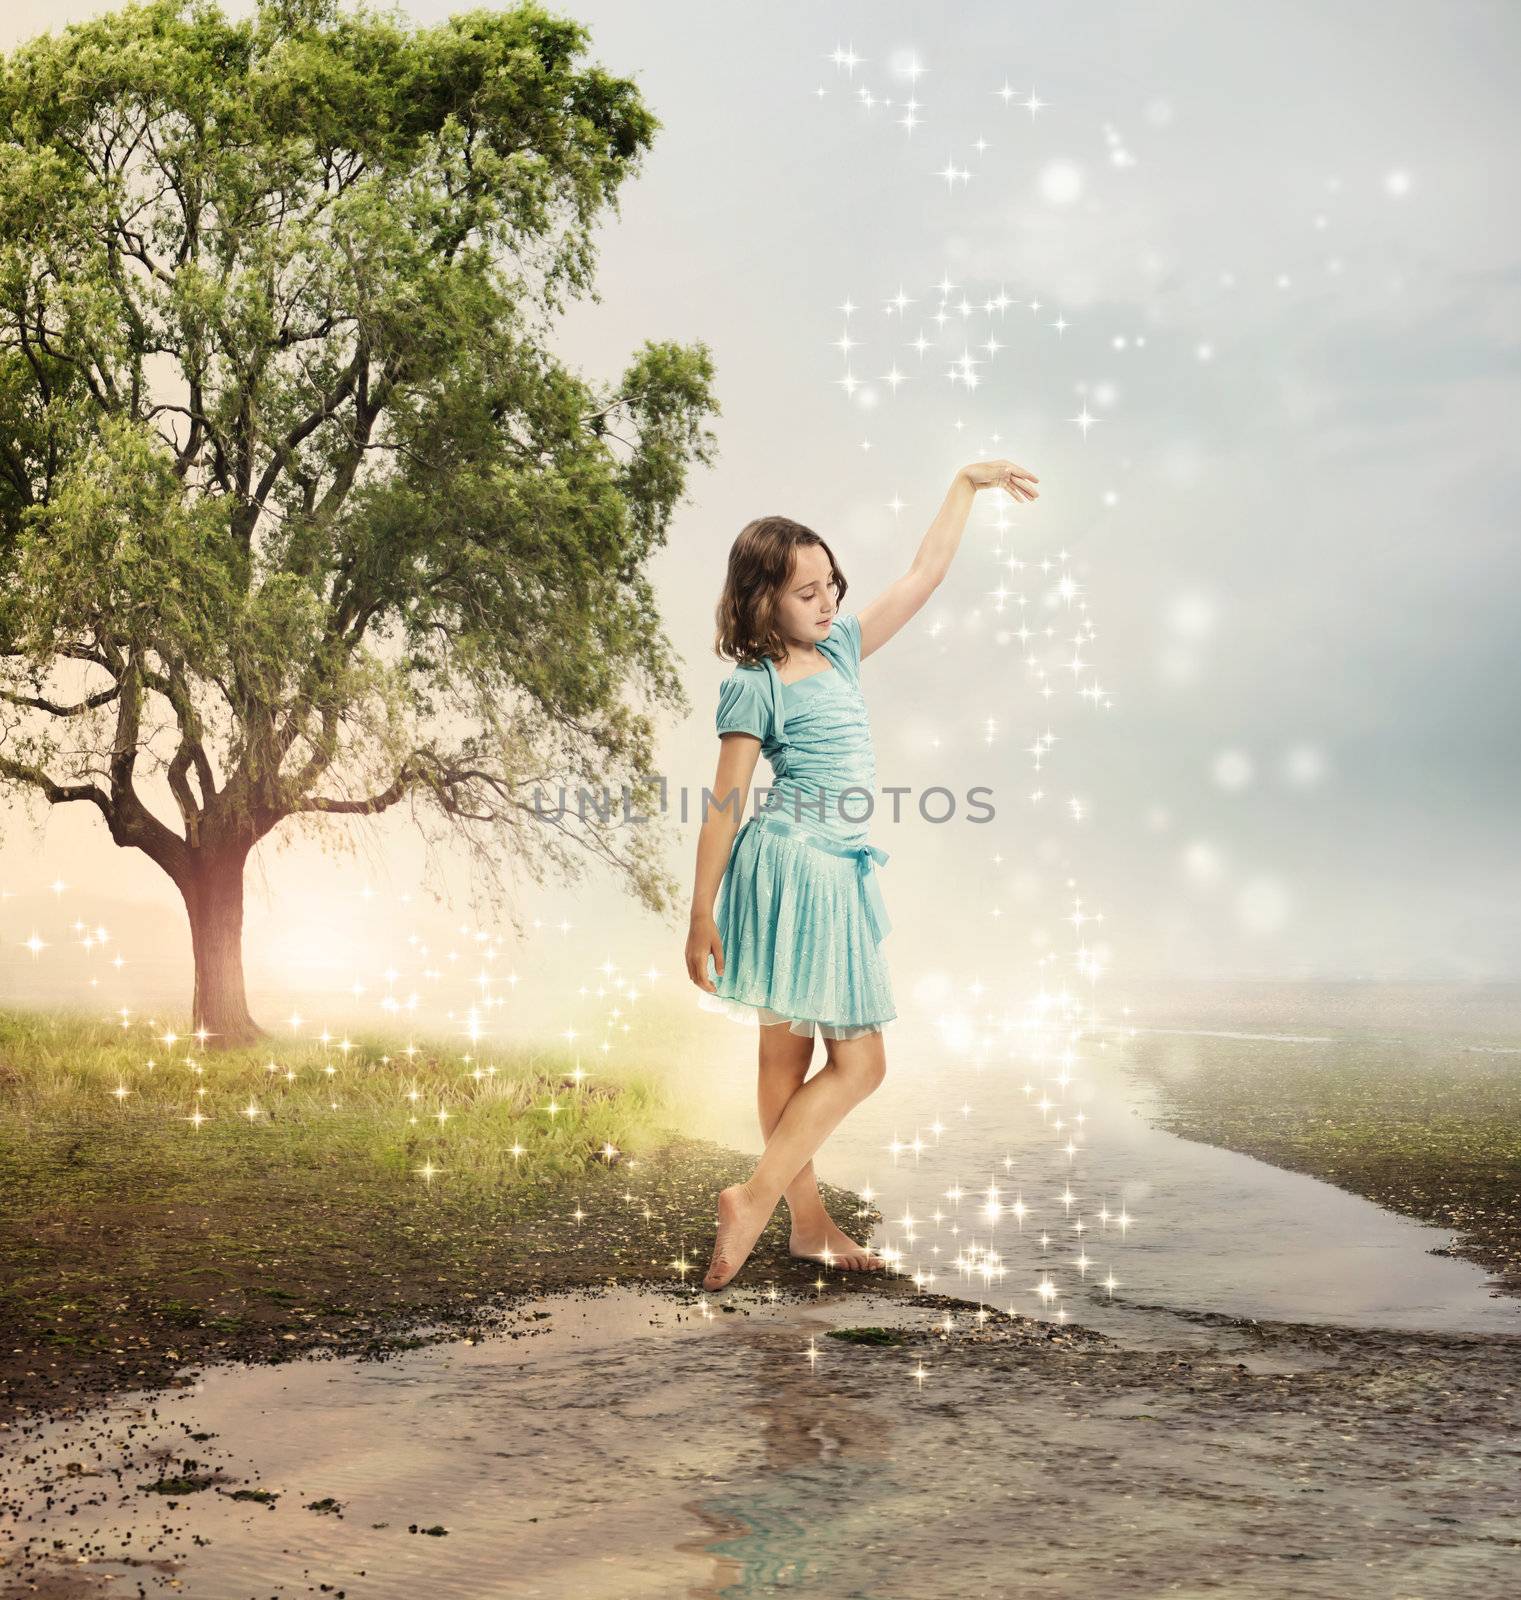 Little Girl at a Shining Brook with Stars